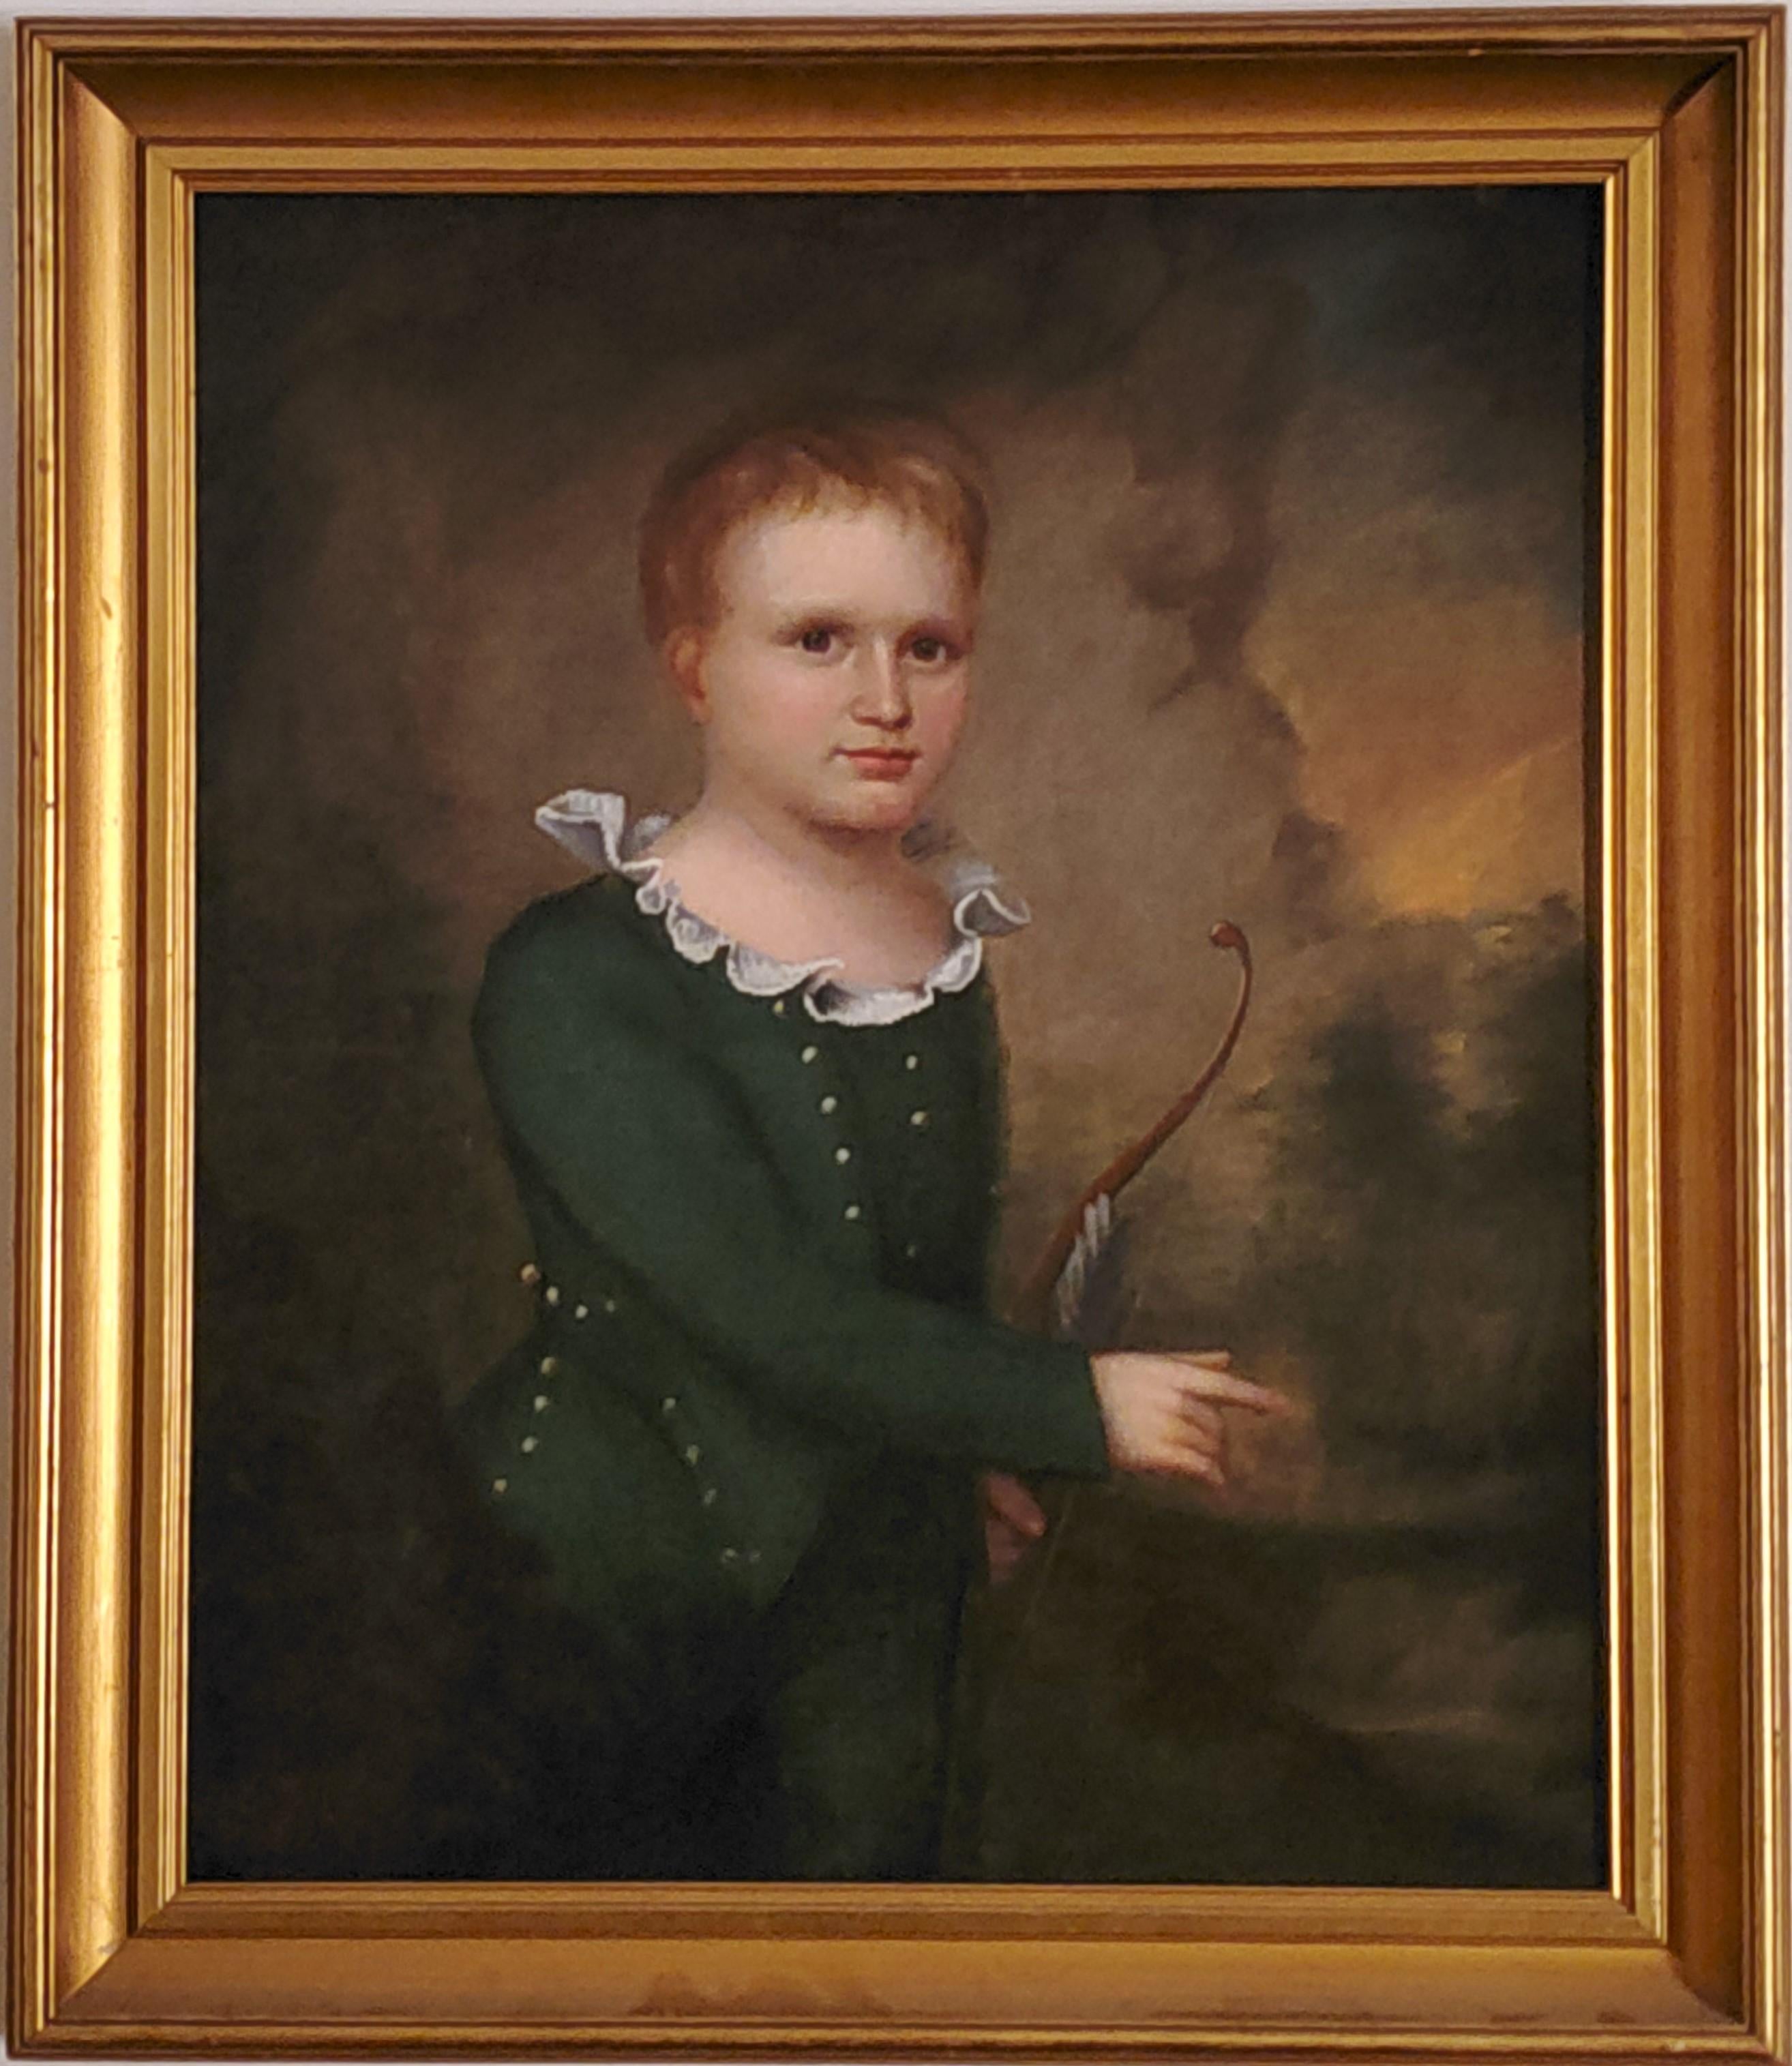 Unknown Portrait Painting - American School Portrait of Child with Bow 19th century